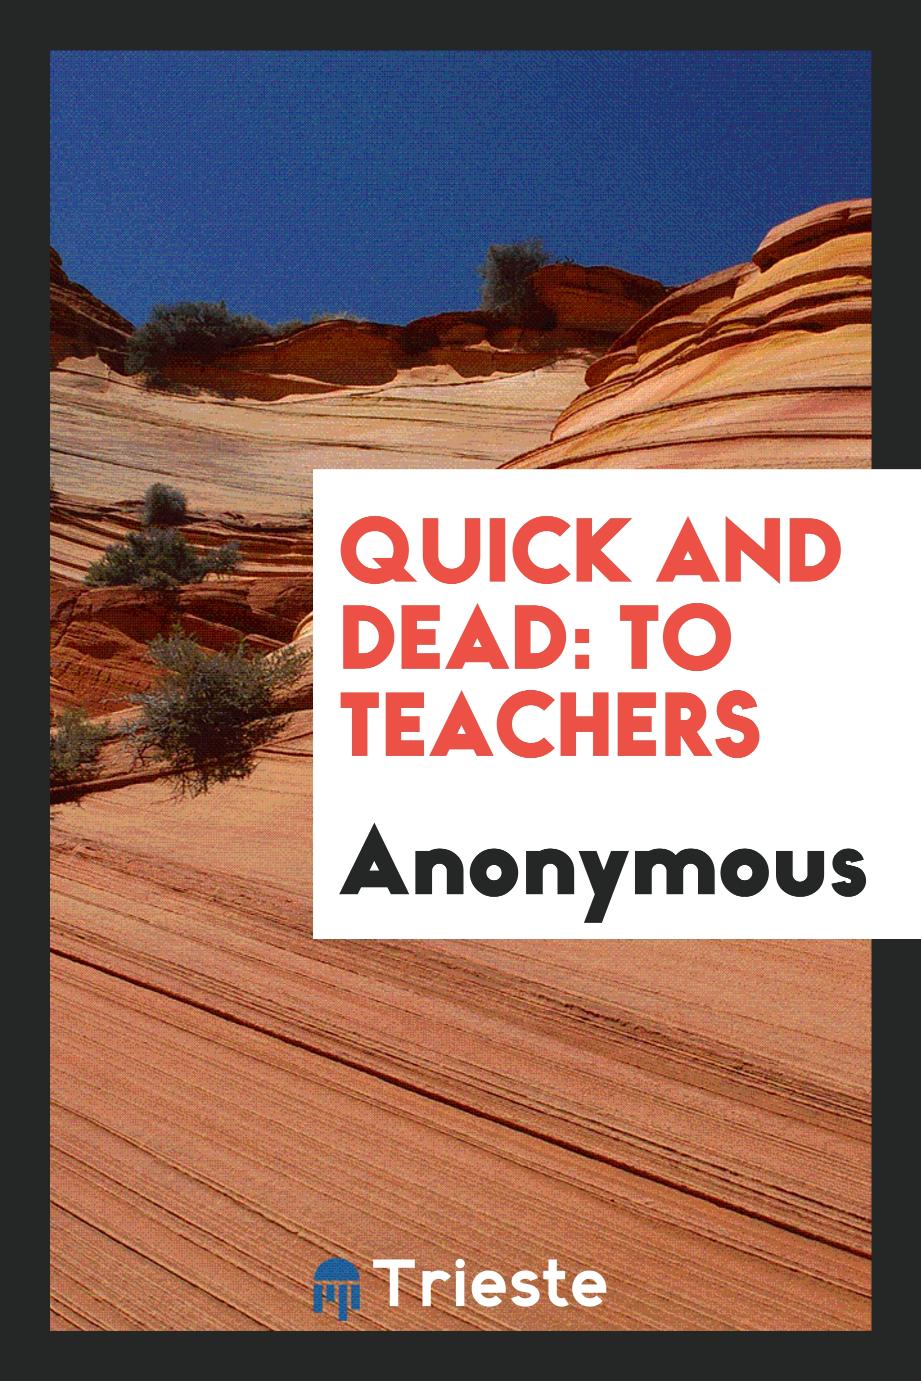 Quick and Dead: To Teachers